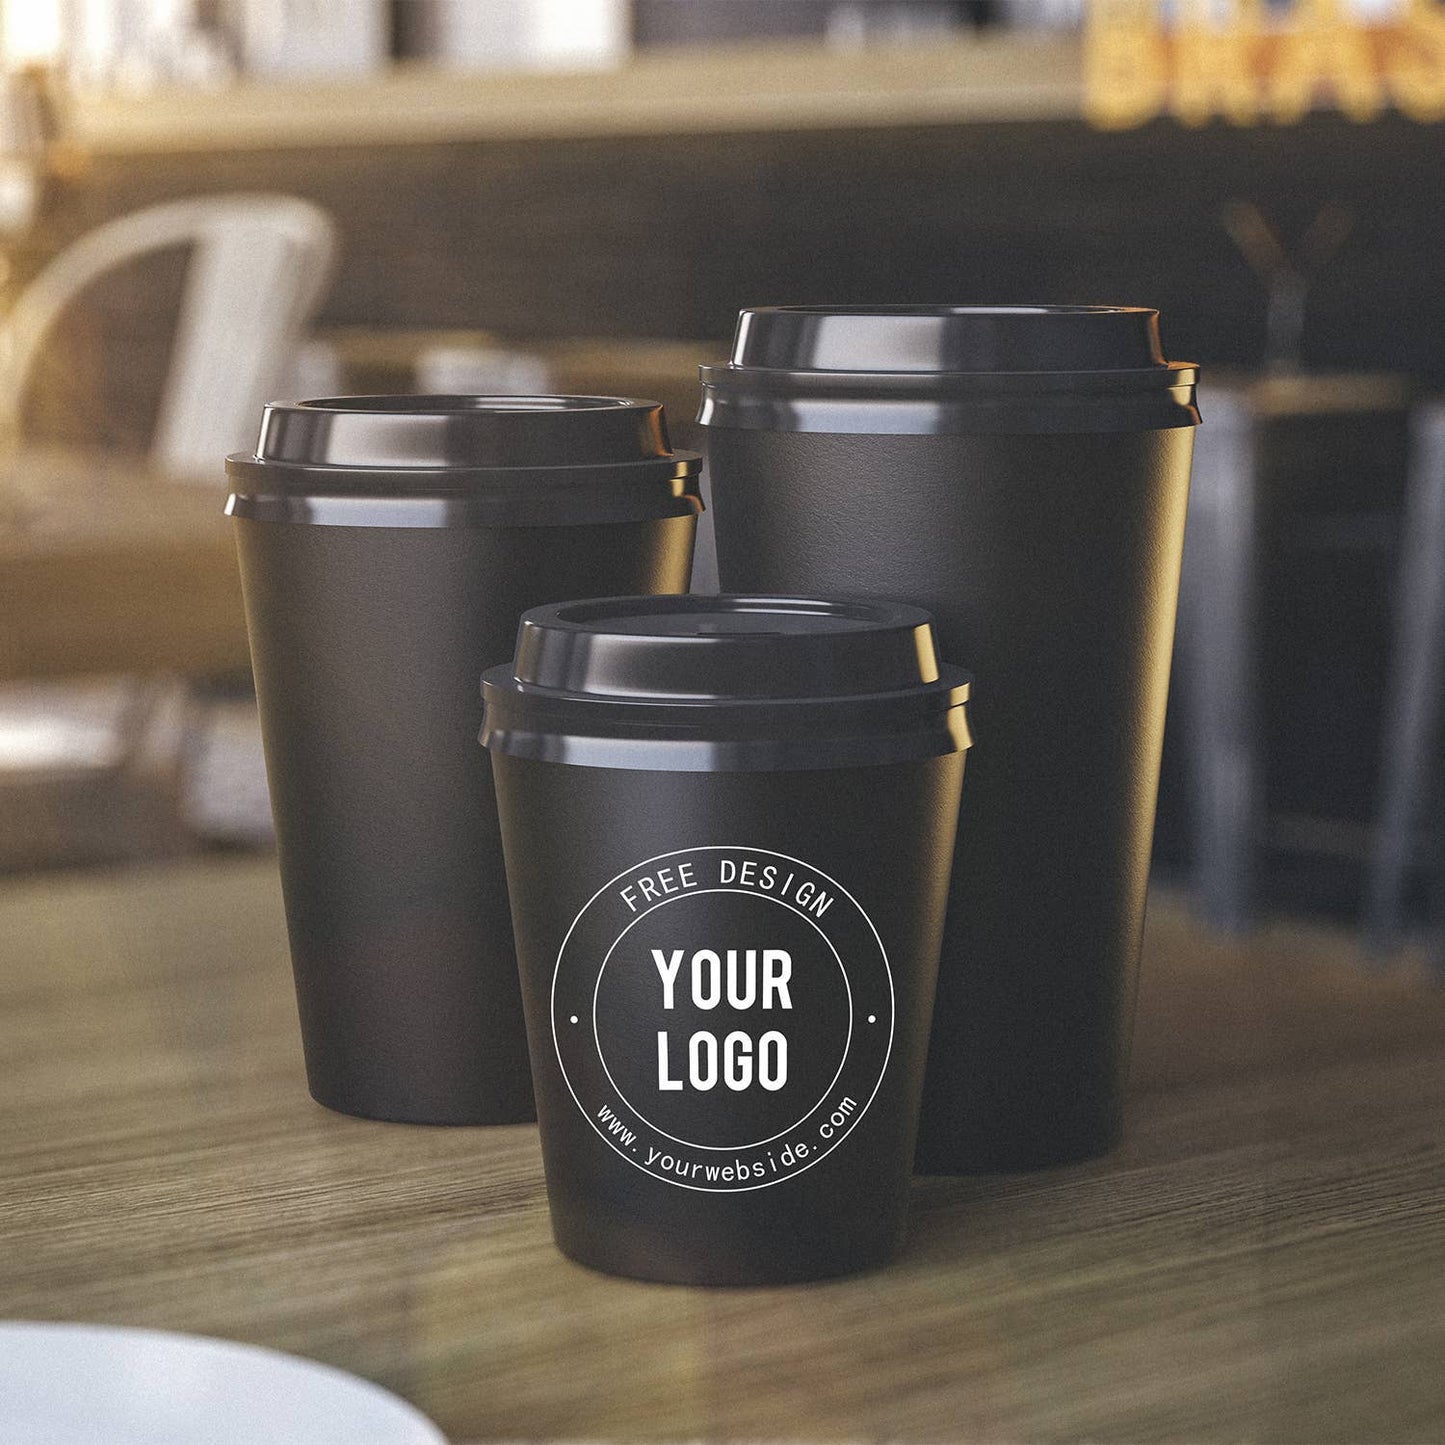 Disposable coffee cups for serving hot coffee, tea, hot chocolate, and other hot beverages. Polyethylene lining for resistance to leaking and moisture penetration.